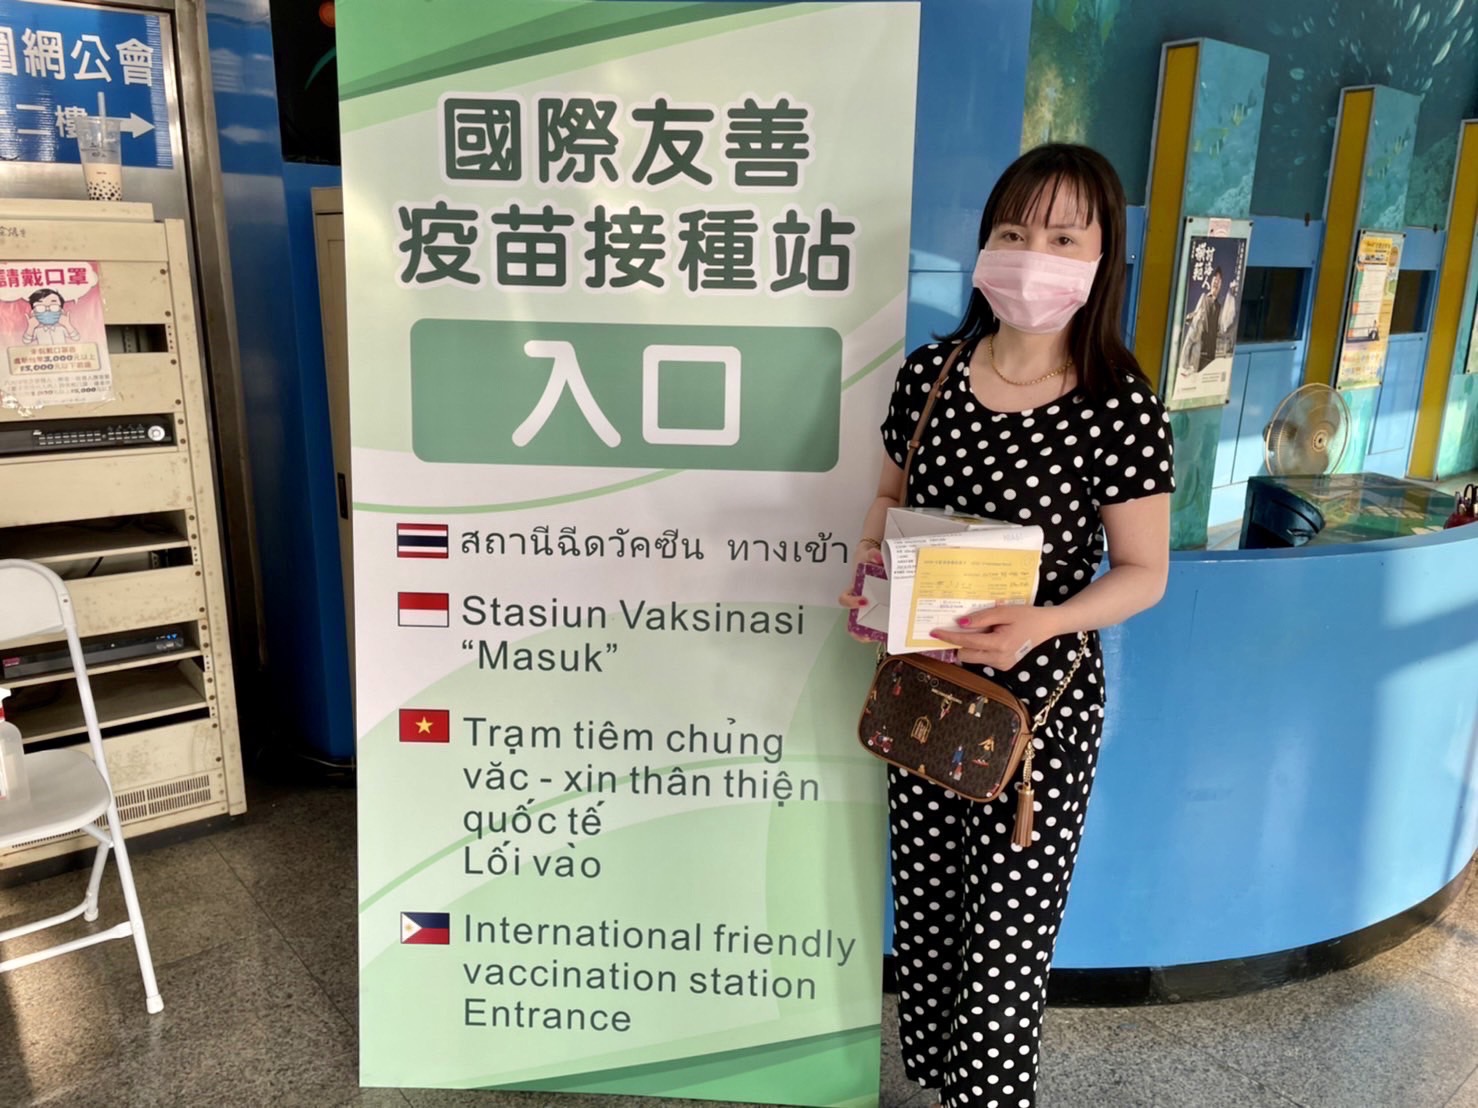 Sally (pseudonym) from Indonesia contact NGO & Kaohsiung City Brigade and successfully got vaccinated at international vaccination station. (Photo / Provided by the Kaohsiung City Brigade)